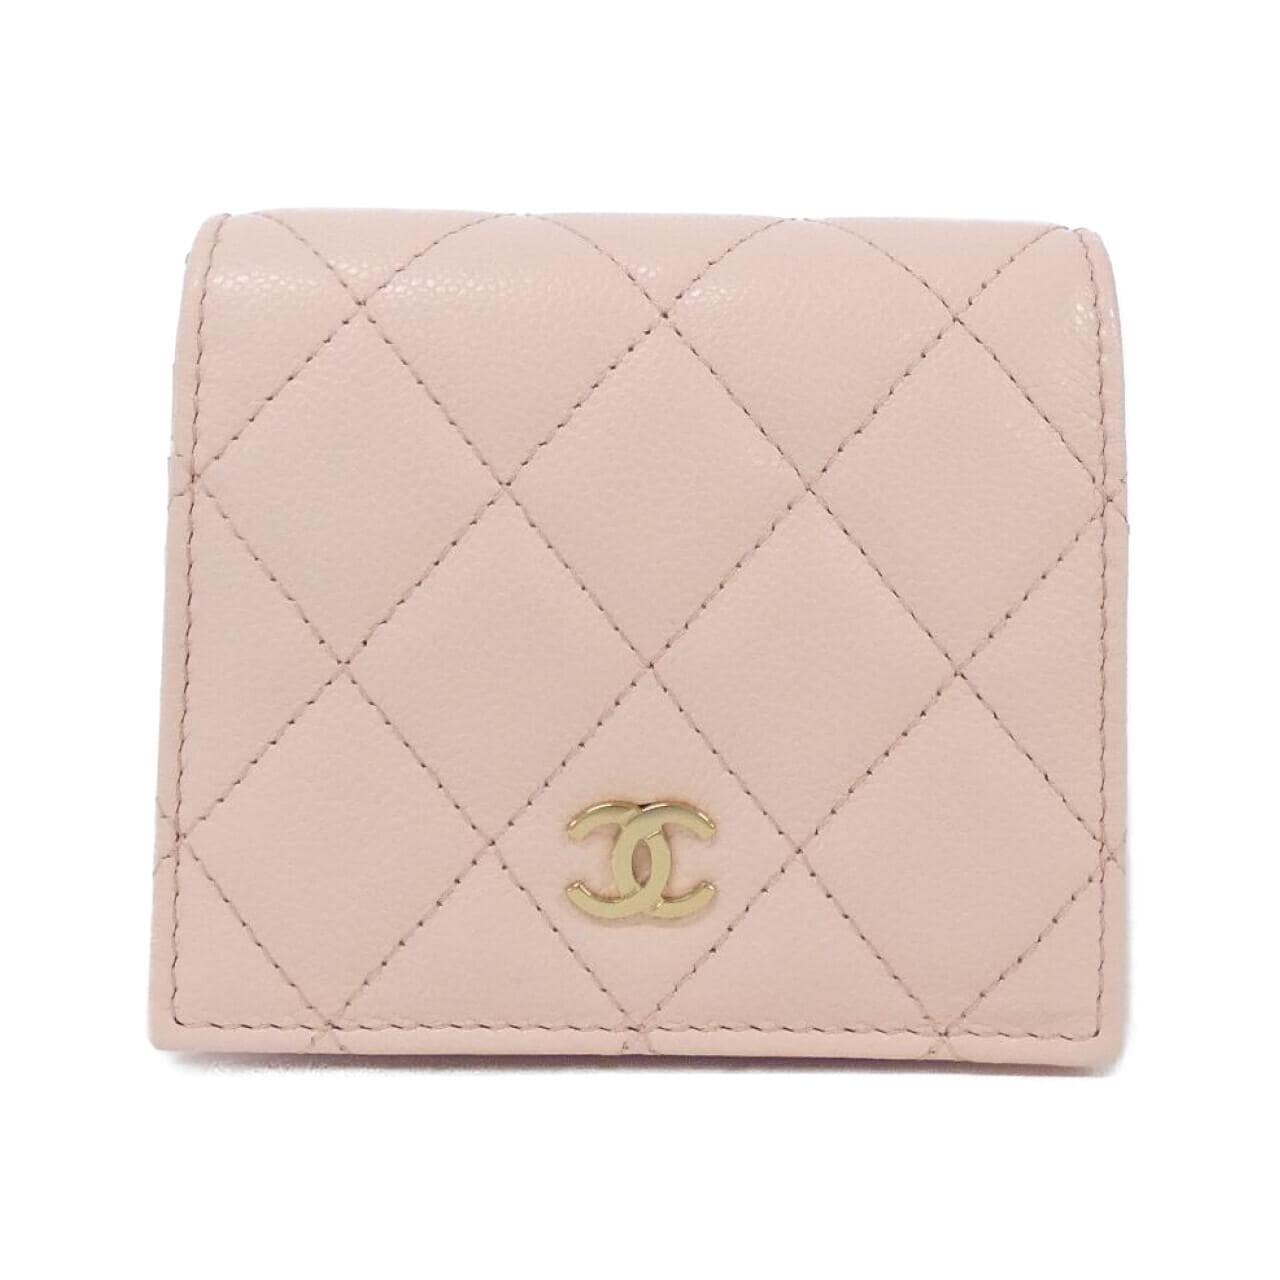 [Unused items] CHANEL Timeless Classic Line AP3178 Wallet